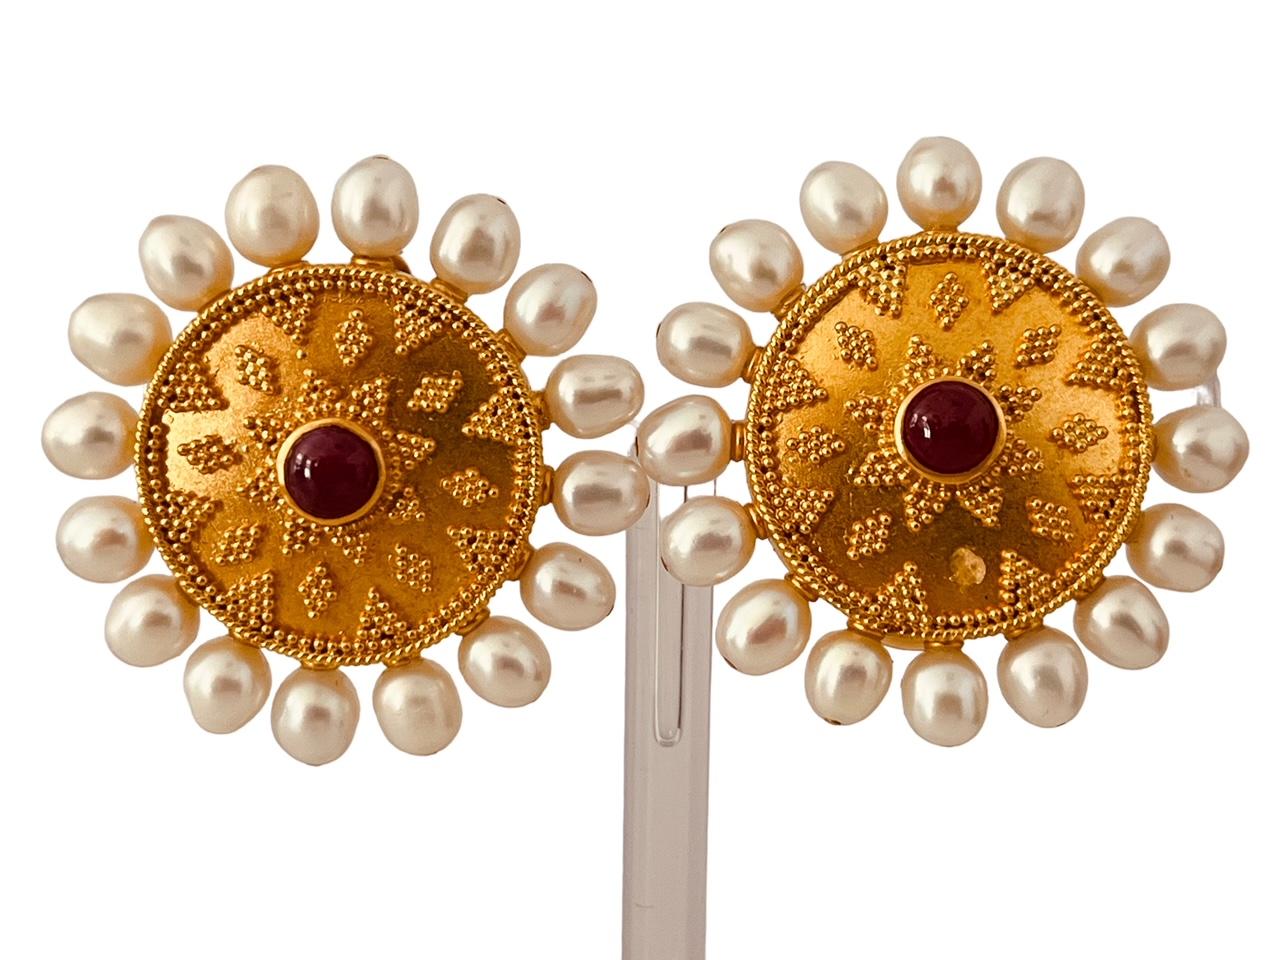 22ct Gold Granulated Disc Earrings Set With A Cabochon Ruby And Cultured Pearls For Sale 2